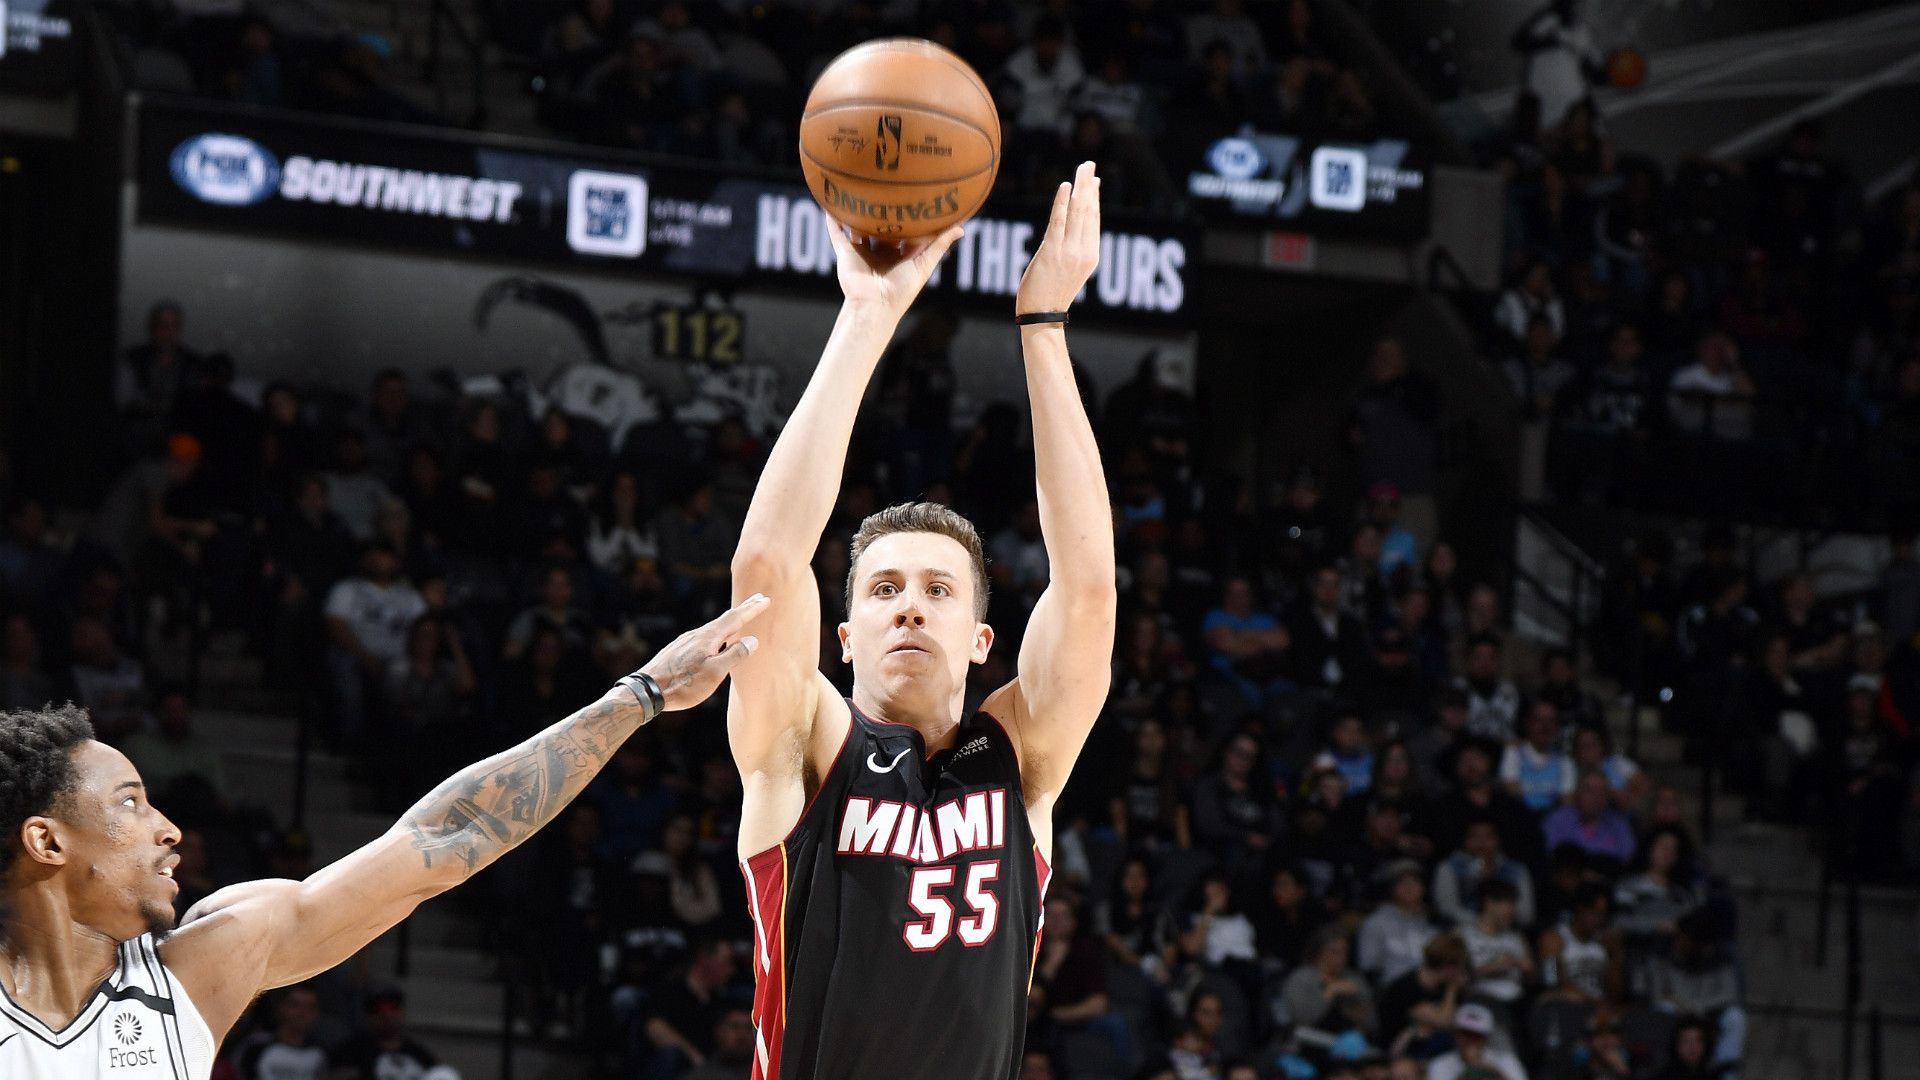 Undrafted Miami Heat rookie Duncan Robinson breaks multiple records in first half vs. New Orleans Pelicans. NBA.com Australia. The official site of